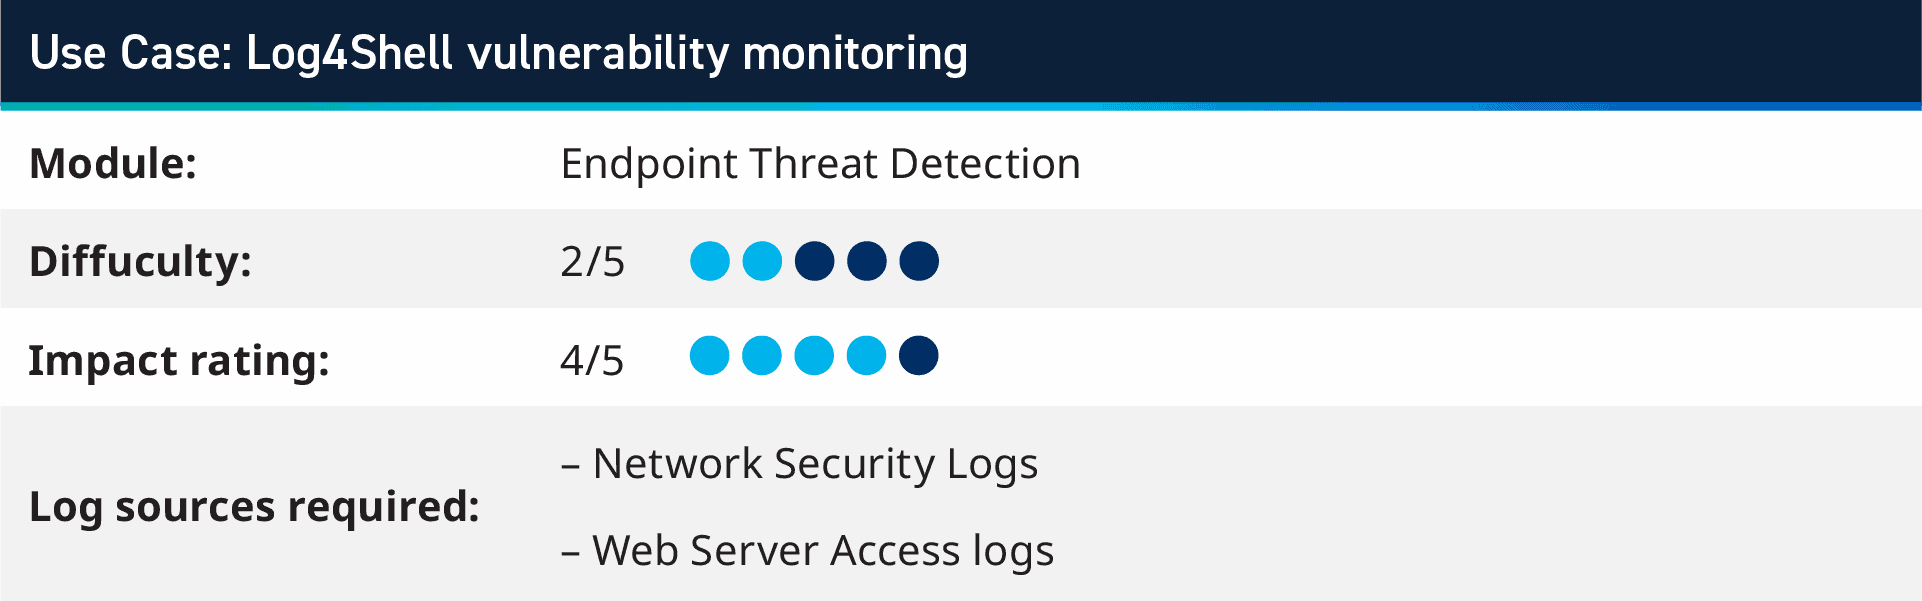 Security use case: Log4Shell vulnerability monitoring 